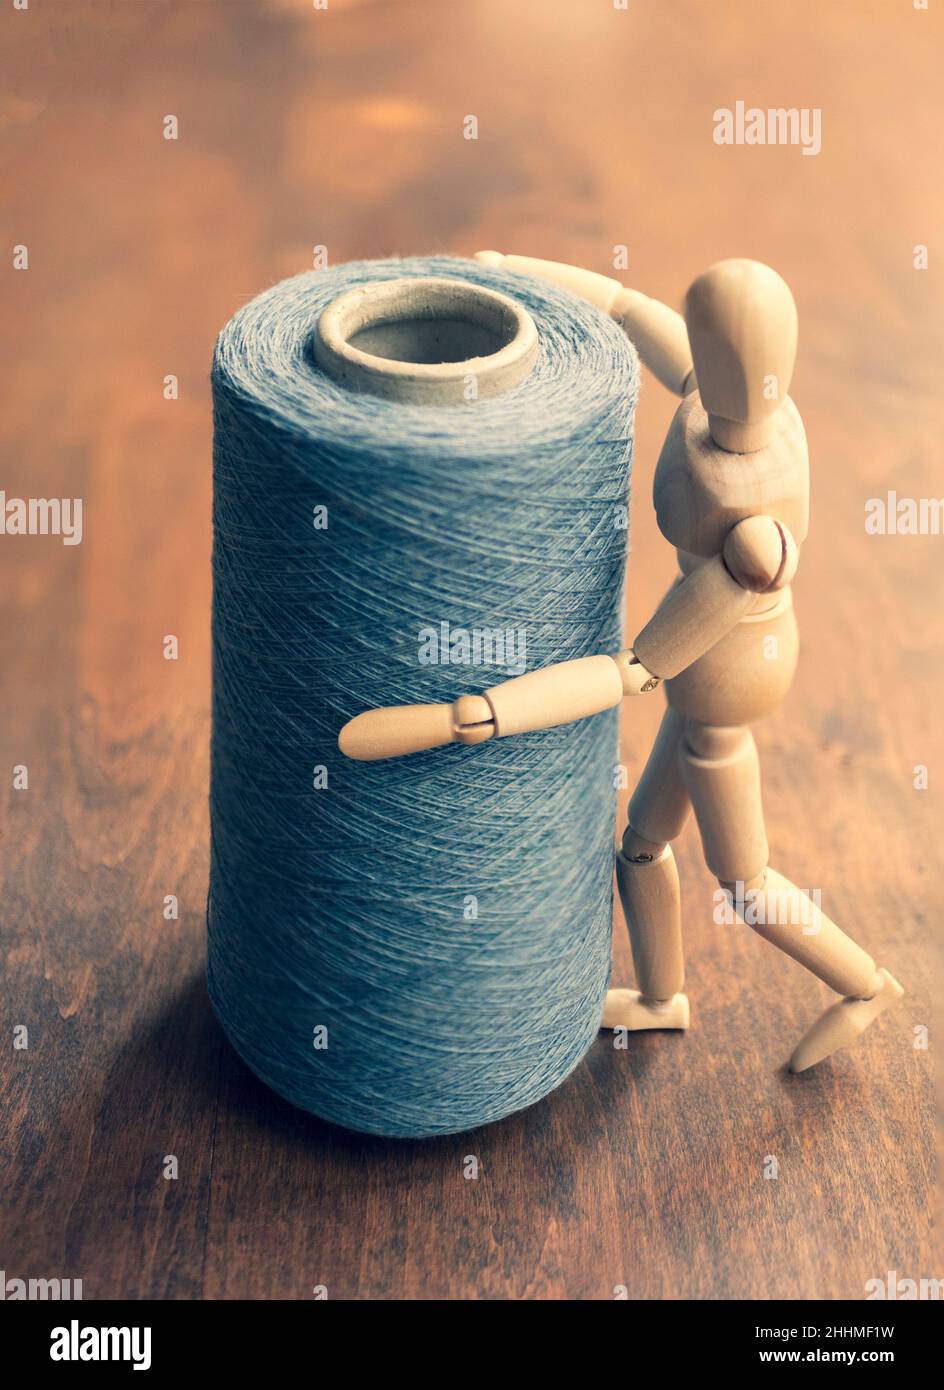 Wooden mannequin holds cone with knitting yarn, upright format. Concept of craftsmanship, needlework, weaving Stock Photo